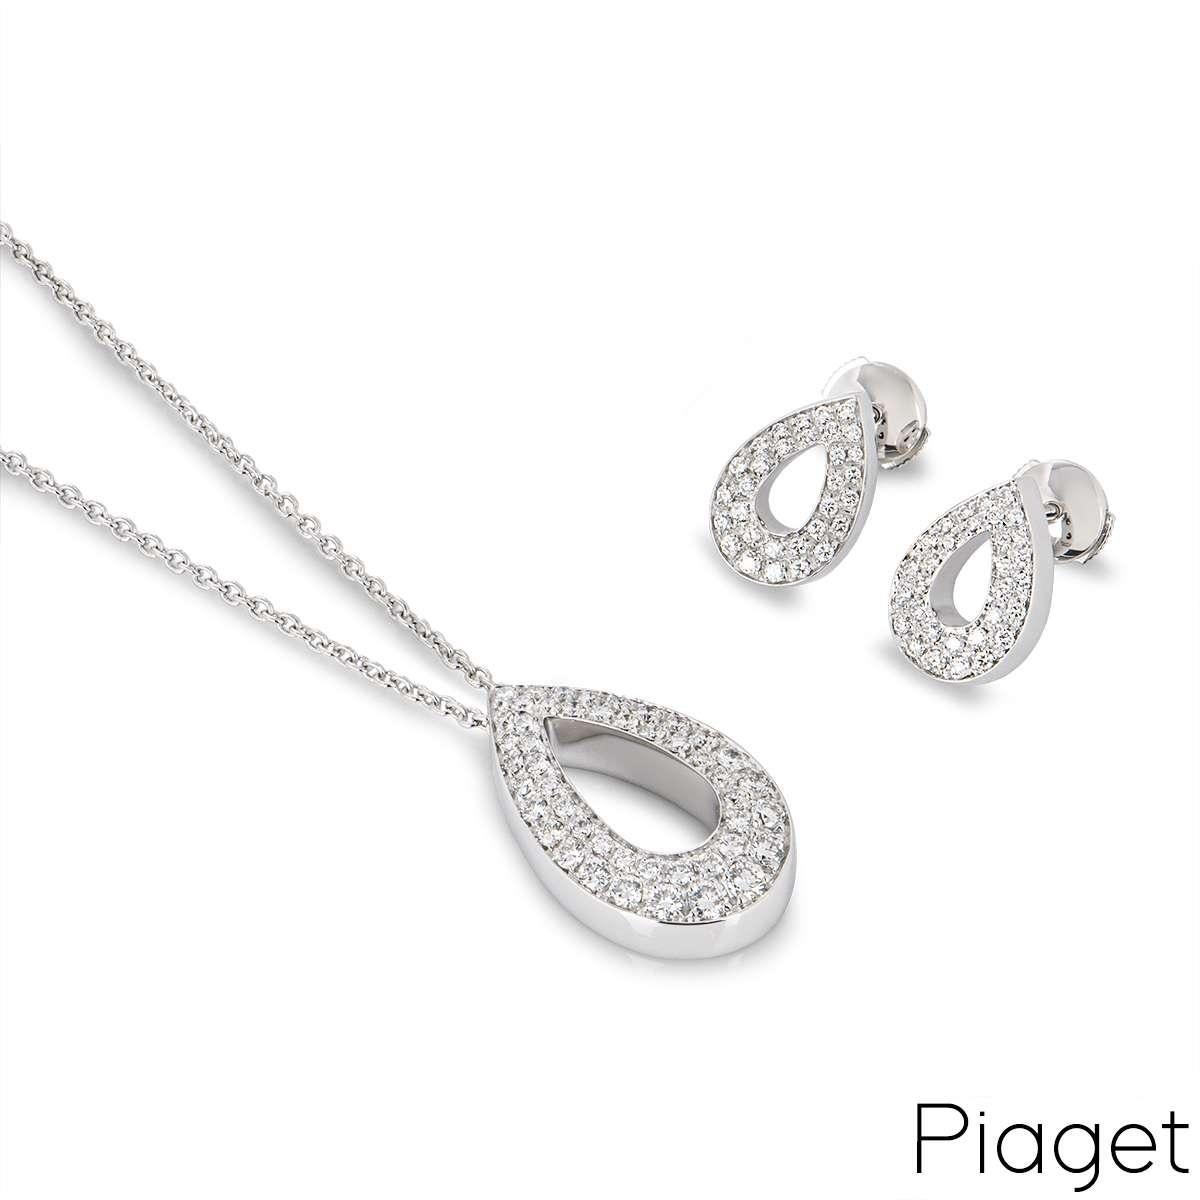 A beautiful 18k white gold diamond pendant and earring suite by Piaget. The pendant is made up of an open work pear shaped motif and is set with 47 round brilliant cut diamonds totalling an approximate weight of 1.25ct. The pendant is 2.5cm in